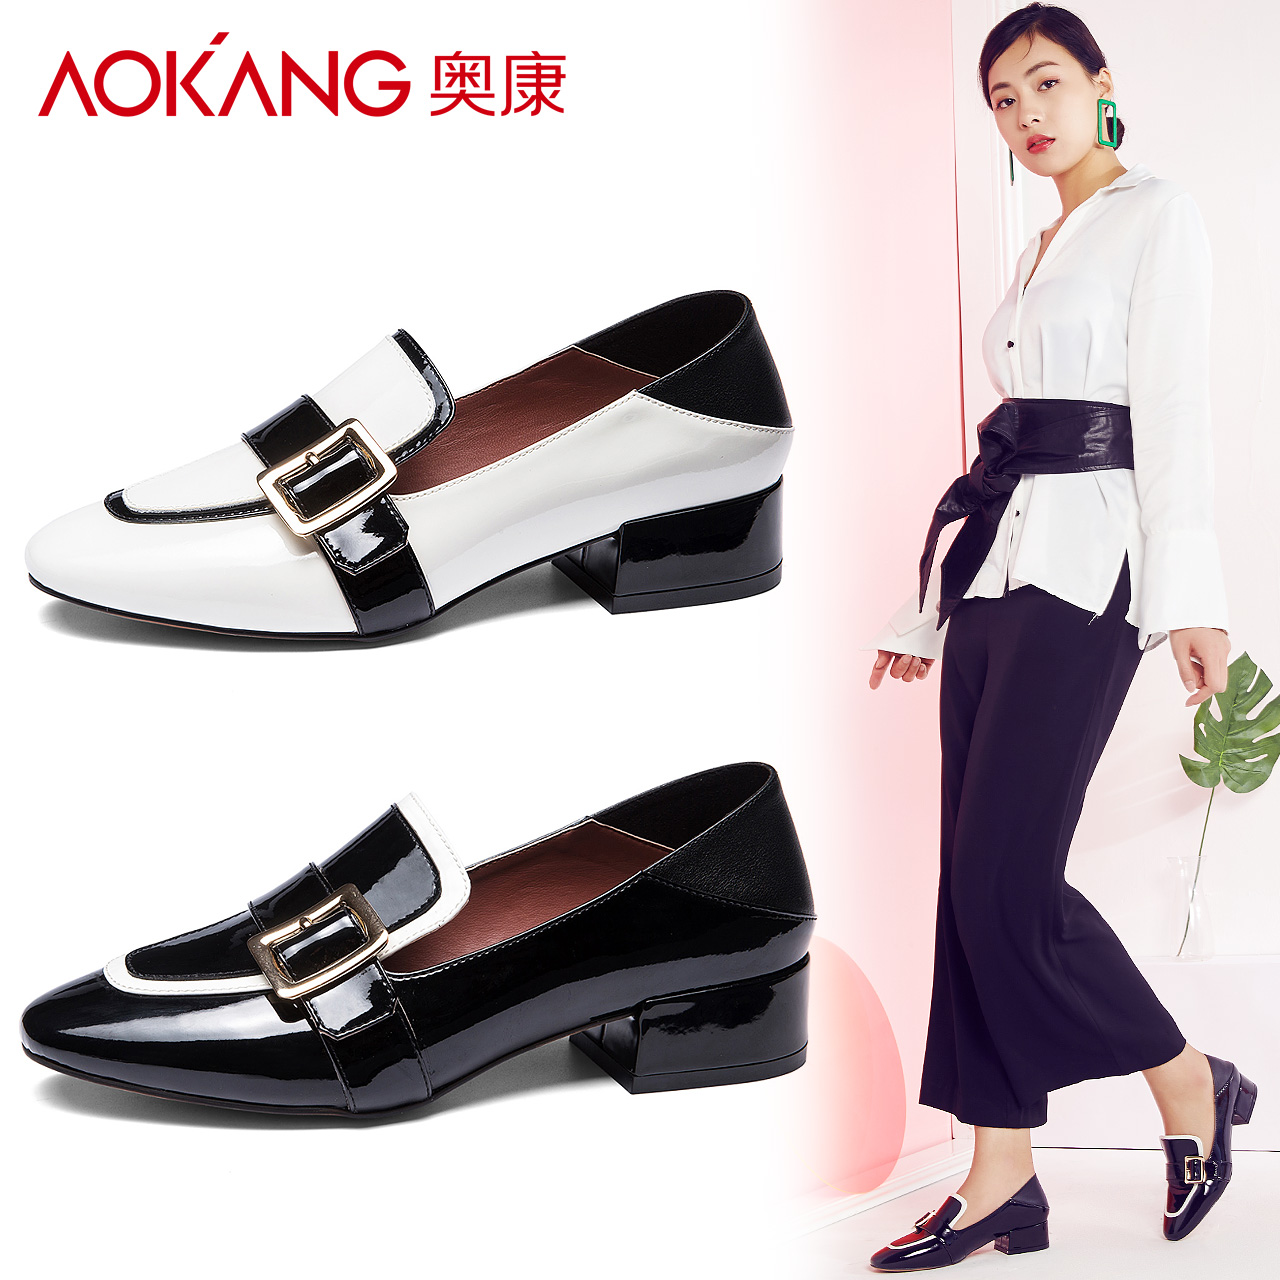 Aokang women's shoes small square head middle heel casual shoes metal decoration fashion two-wear single shoes